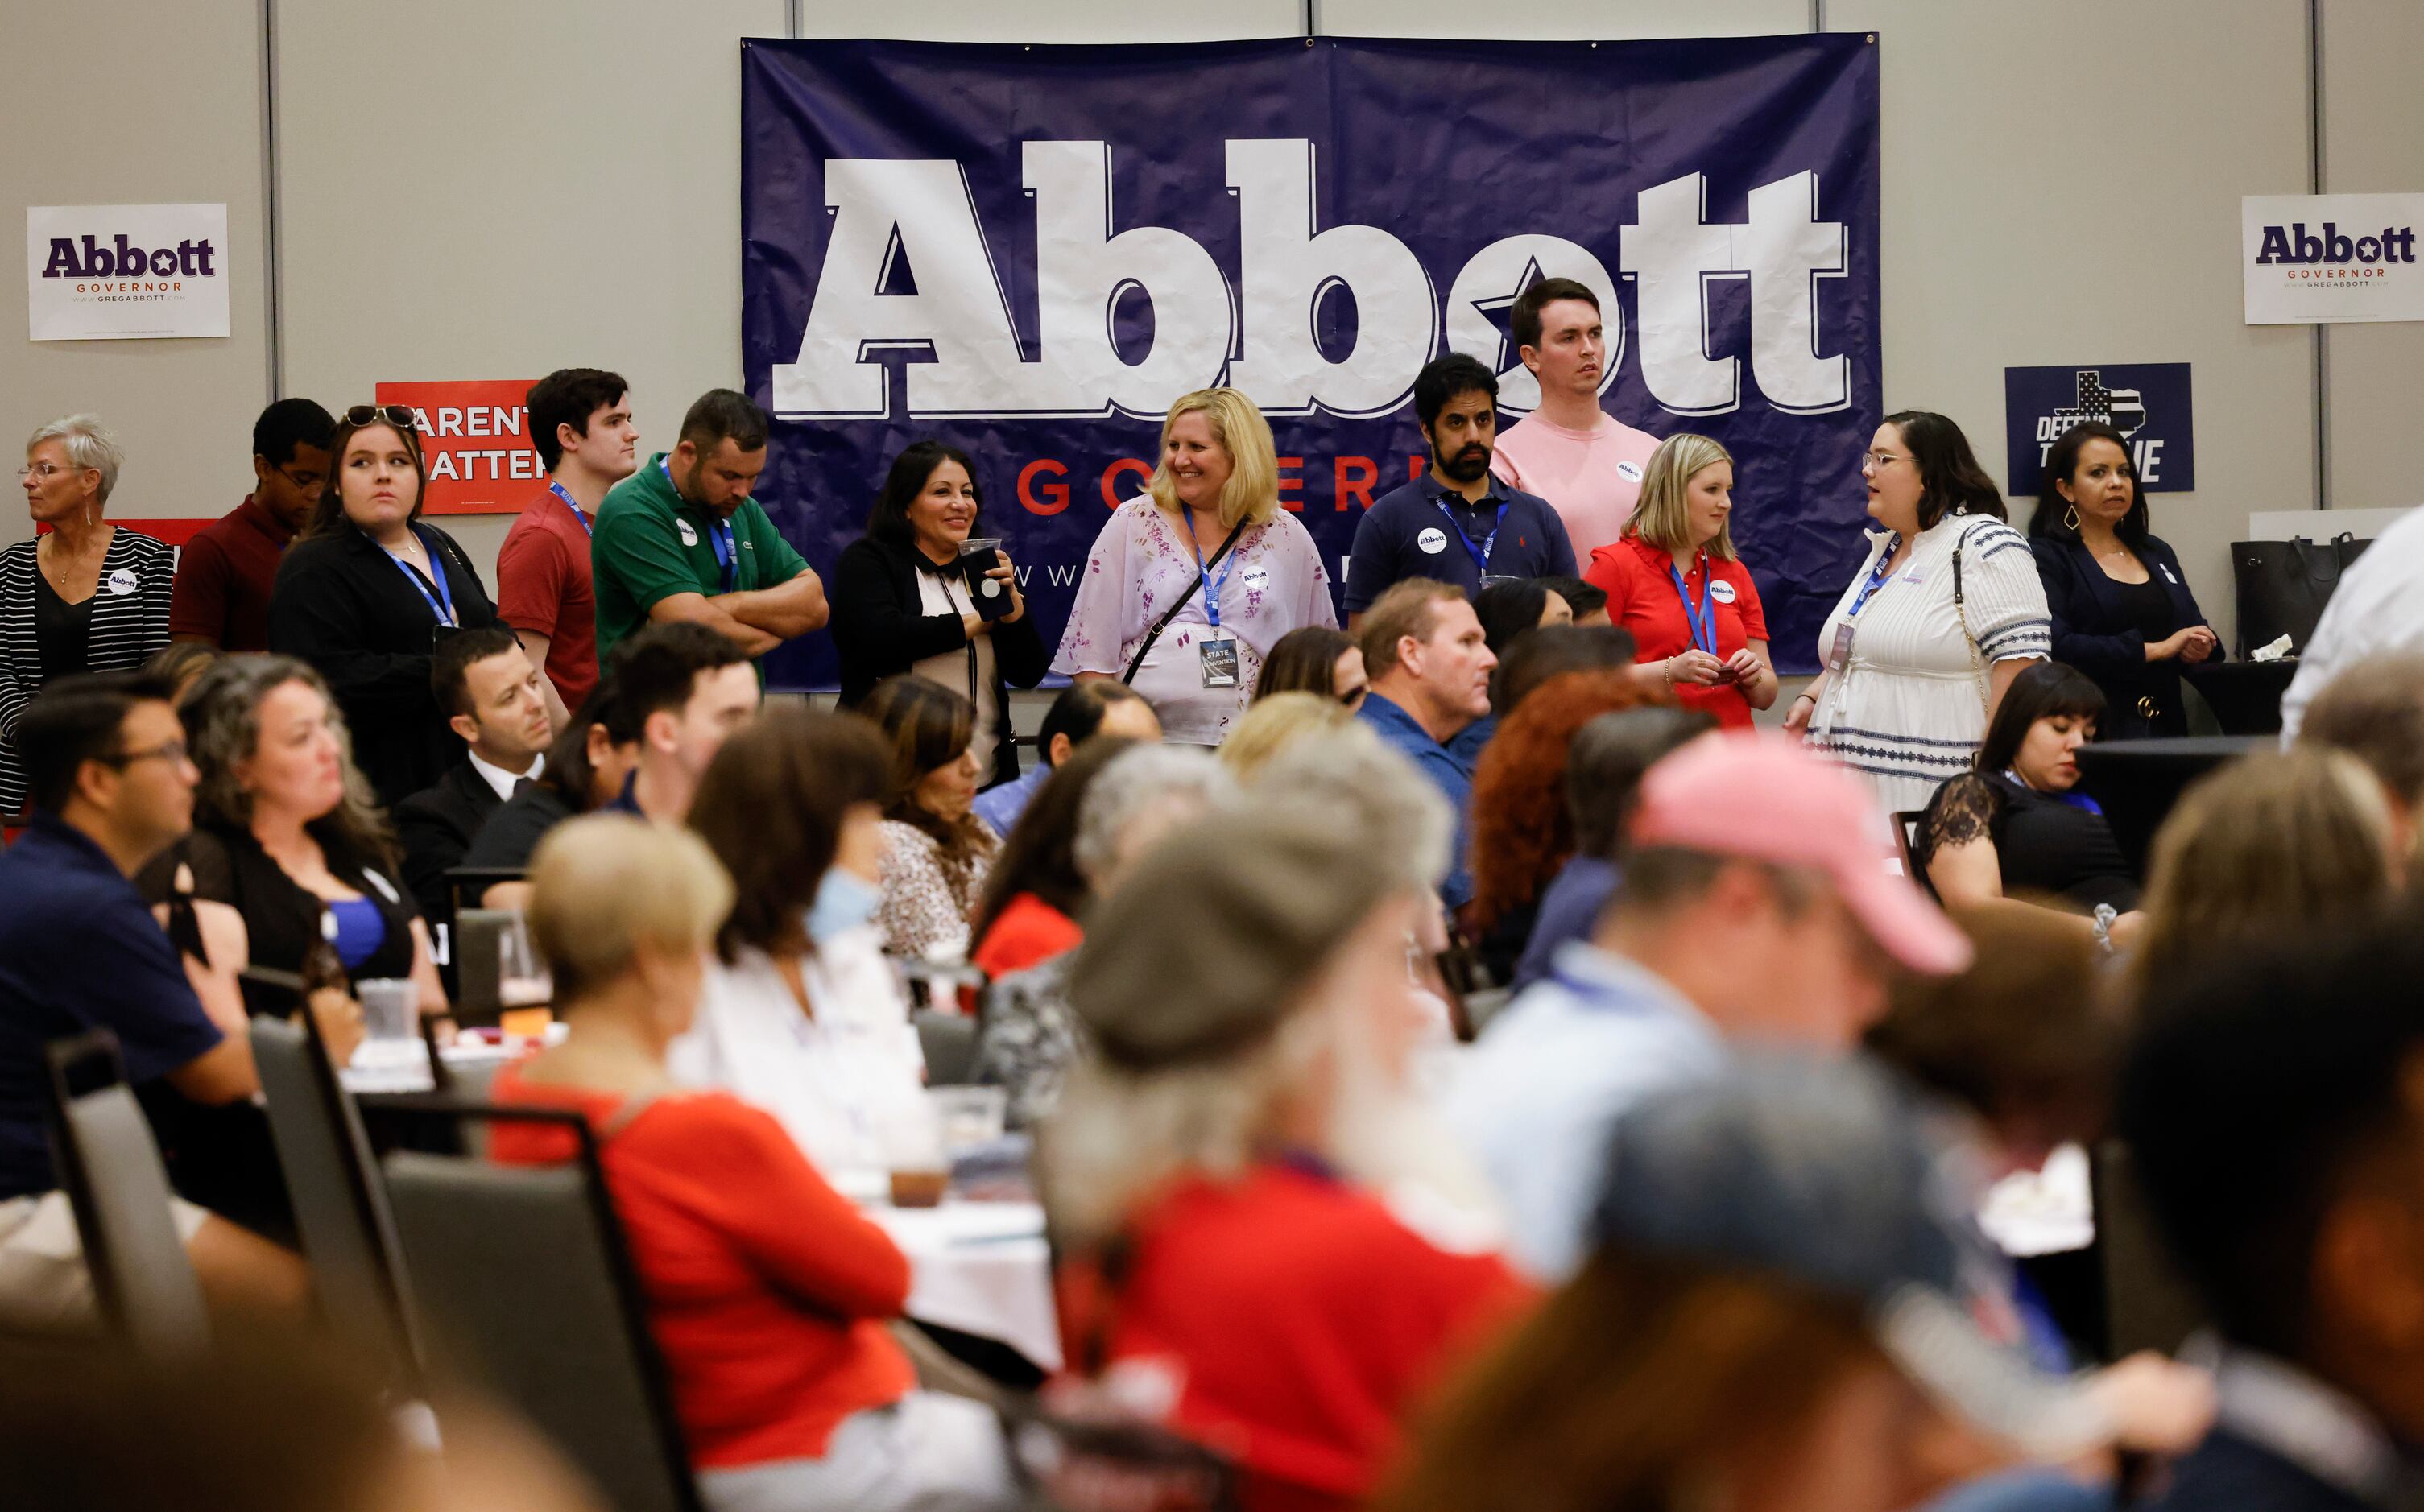 Crowd gathers at a debate watch party for Texas Governor Greg Abbott ahead of his arrival at...